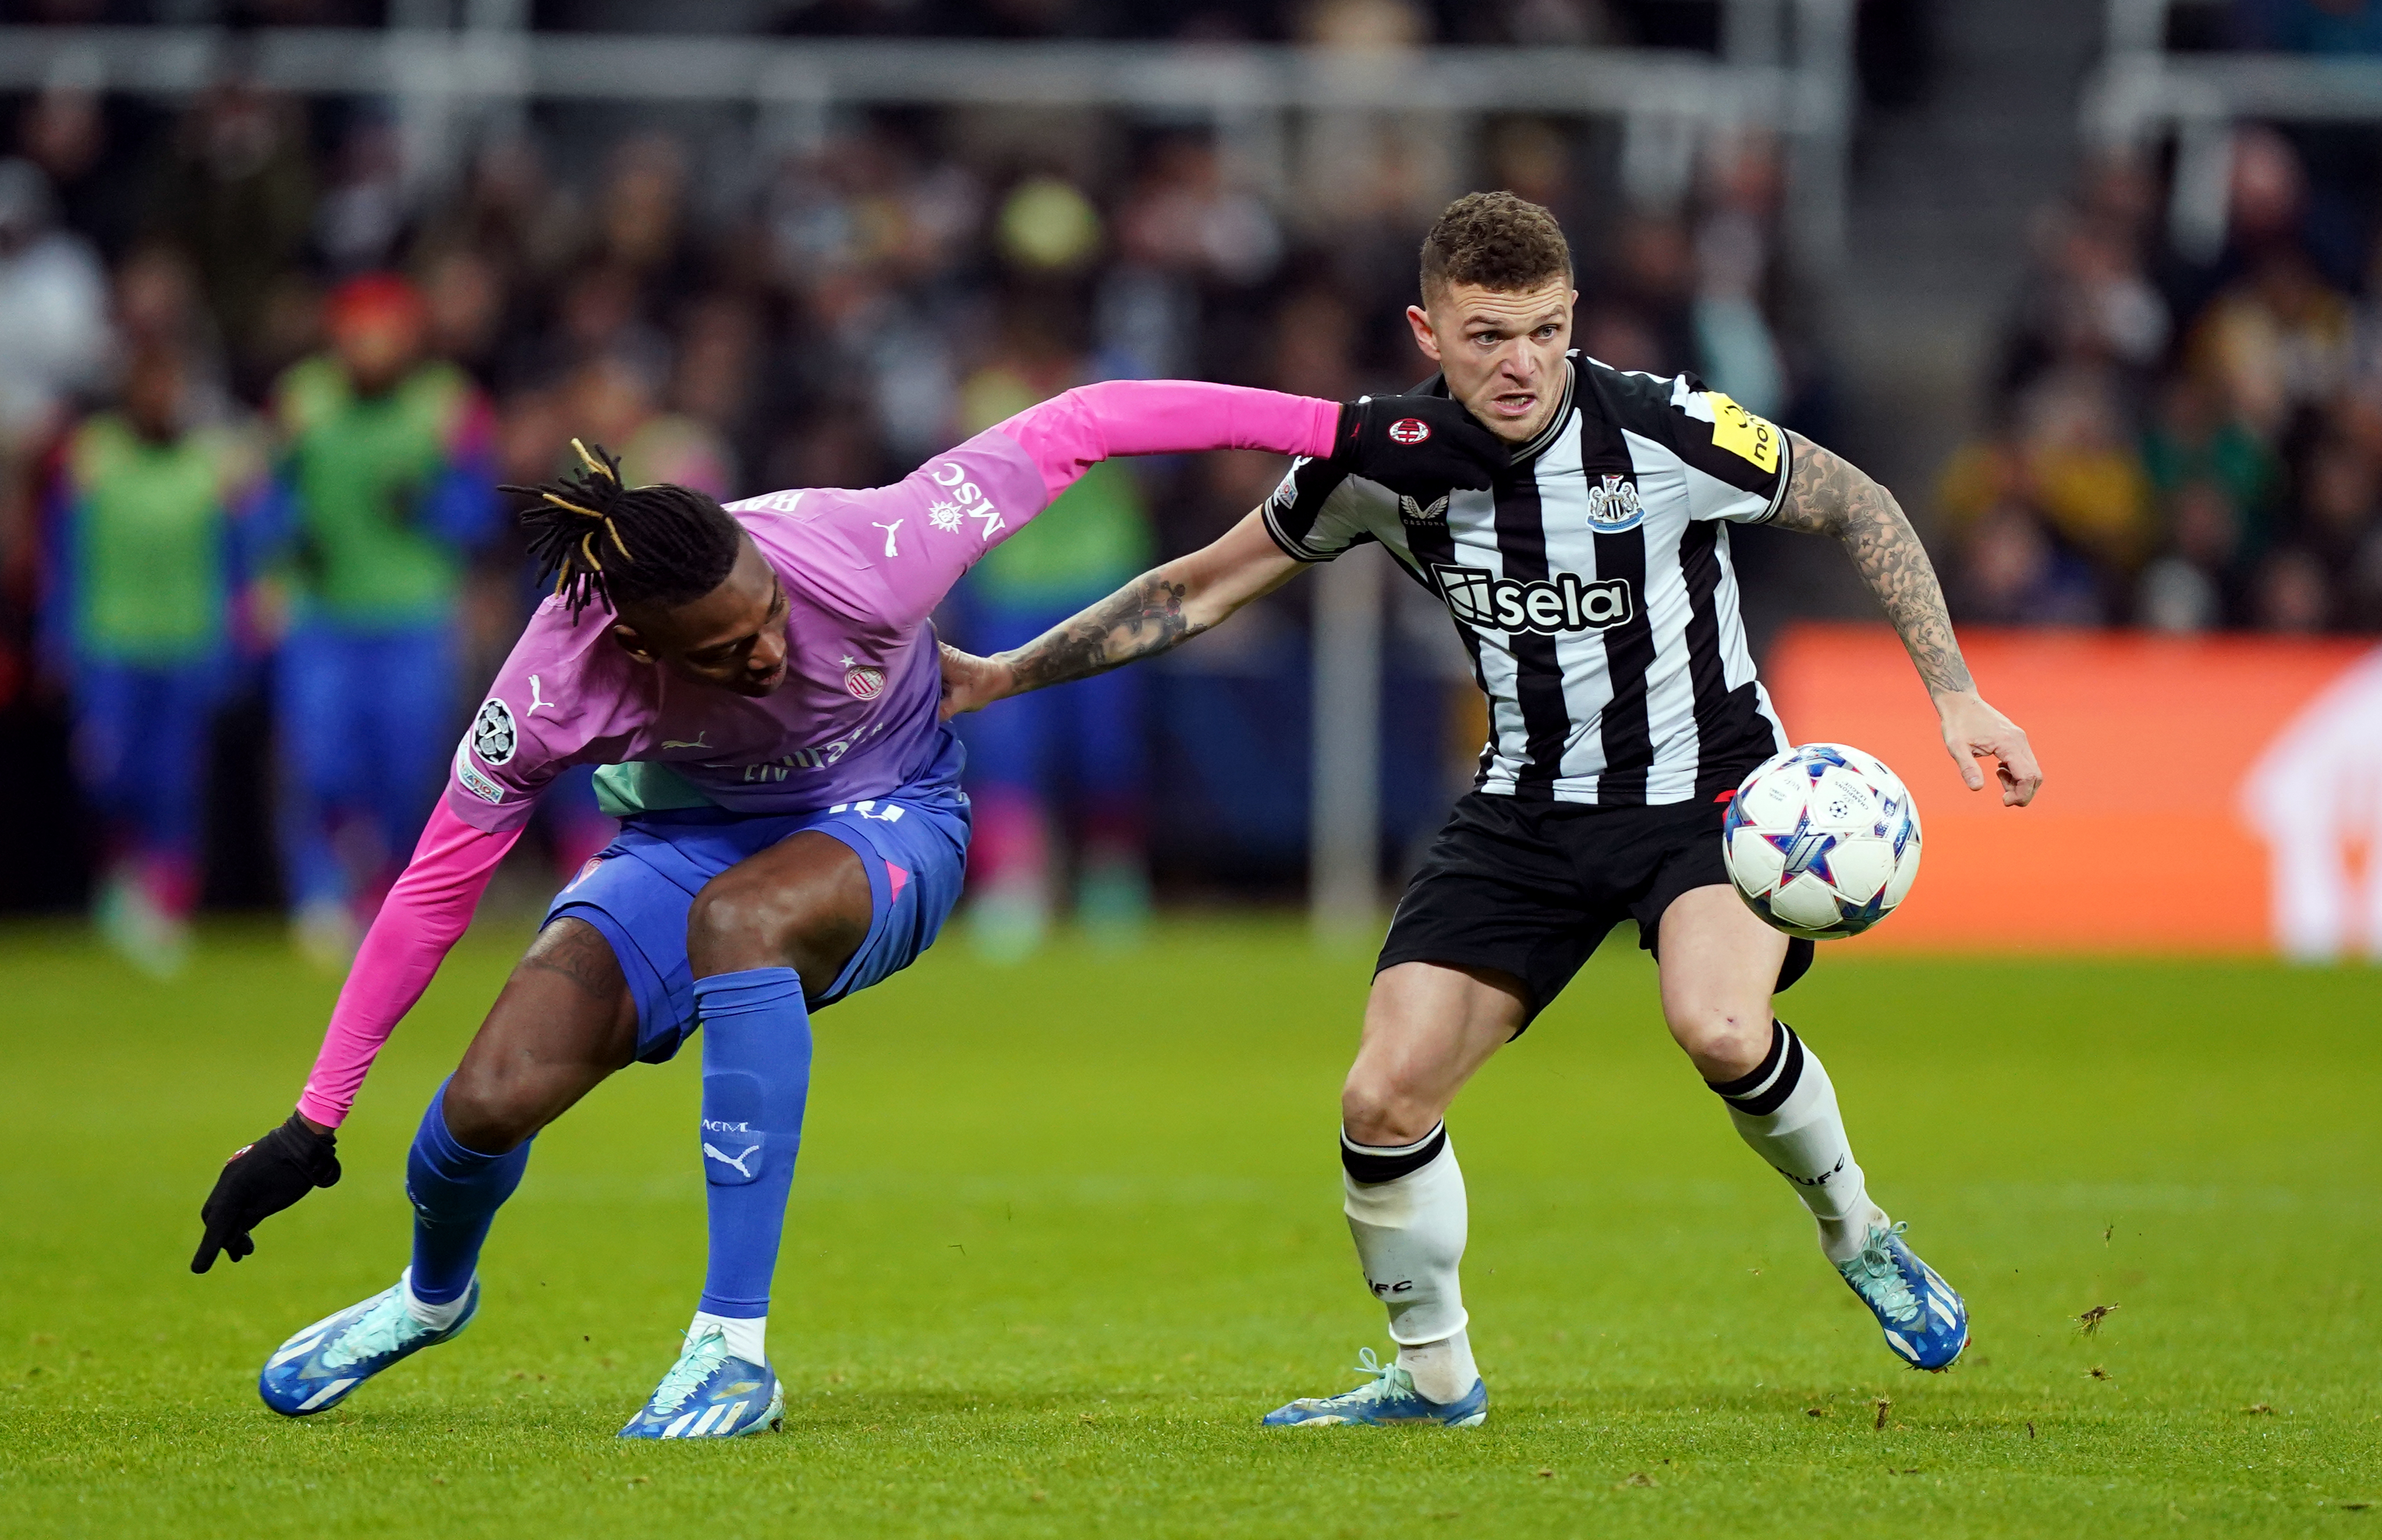 Newcastle full-back Kieran Trippier will miss the Premier League clash with Fulham through suspension